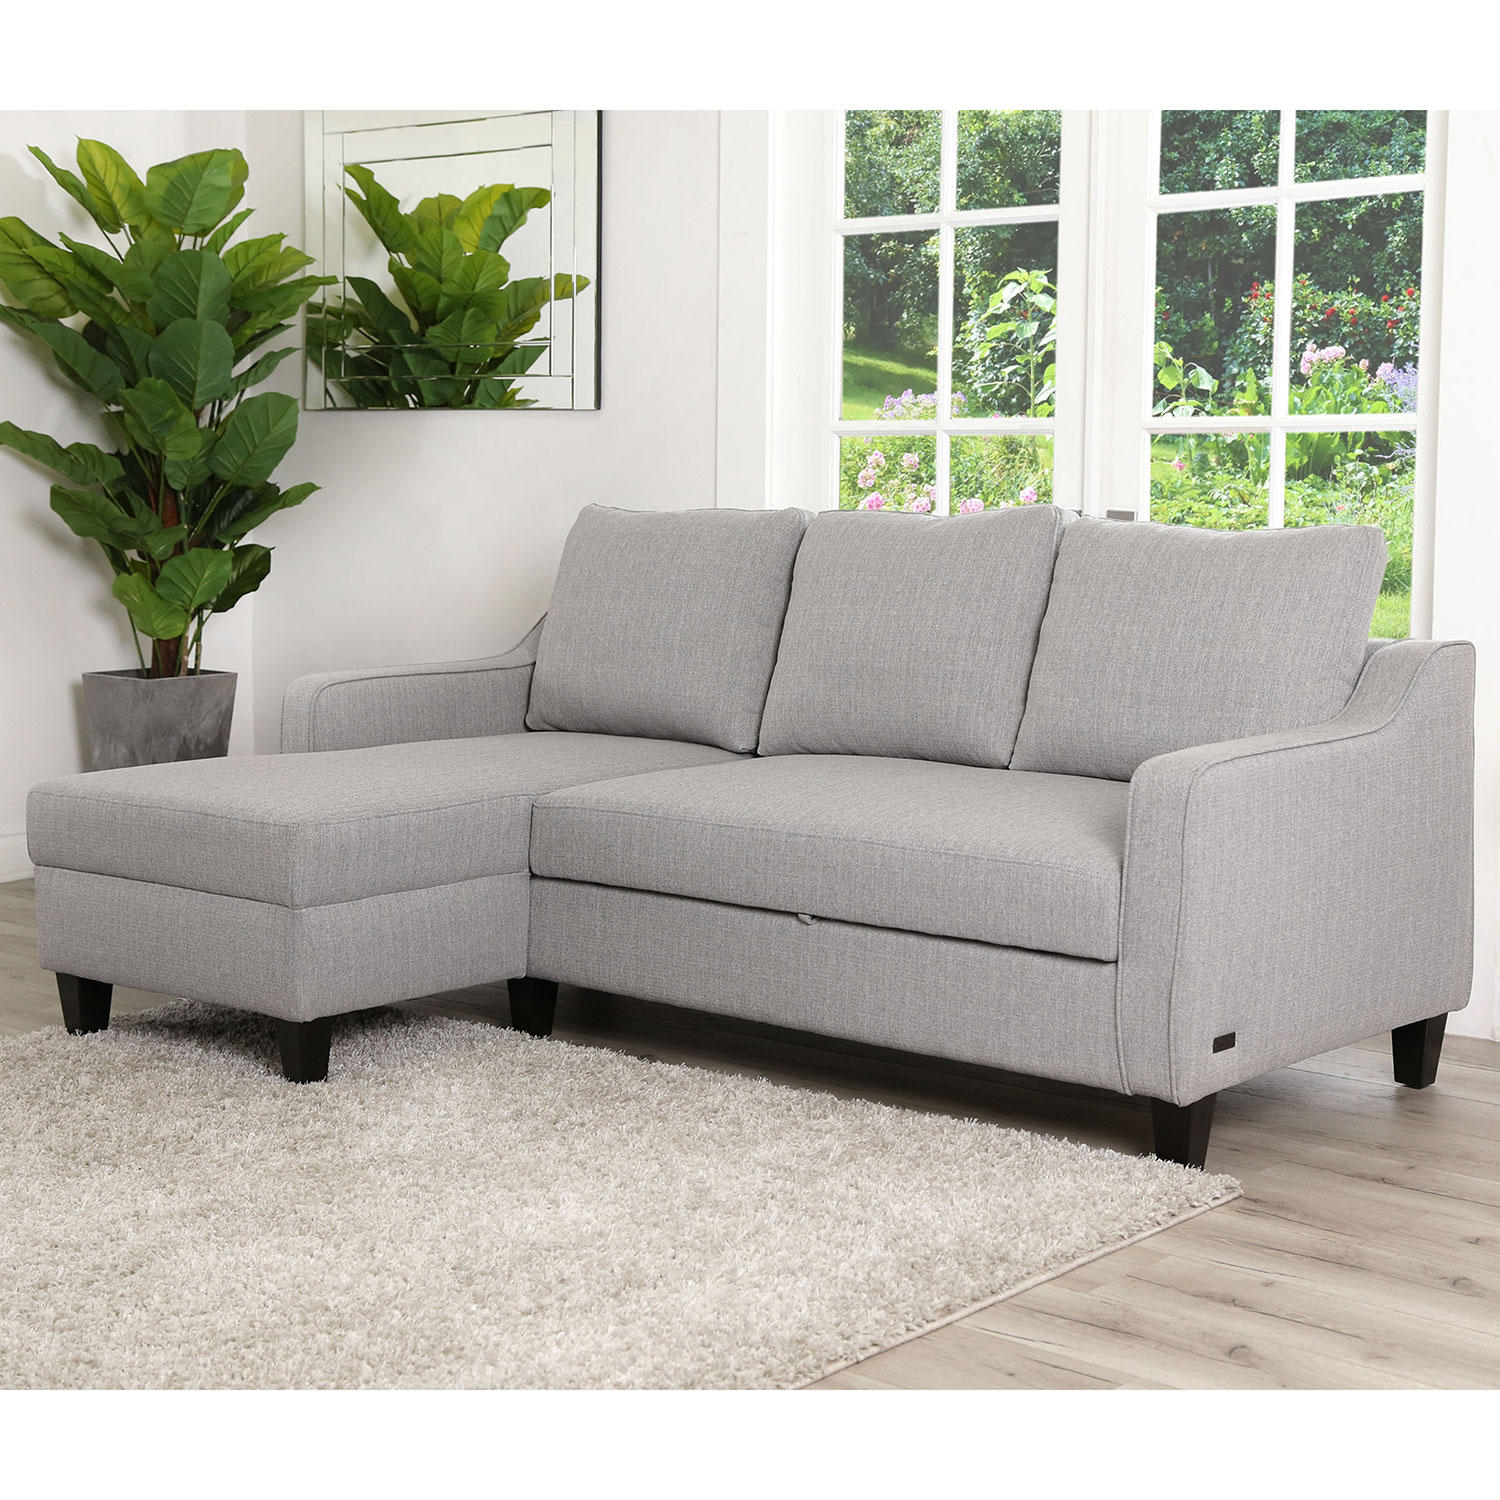 Abbyson Living Courtney Sectional with Pullout Bed